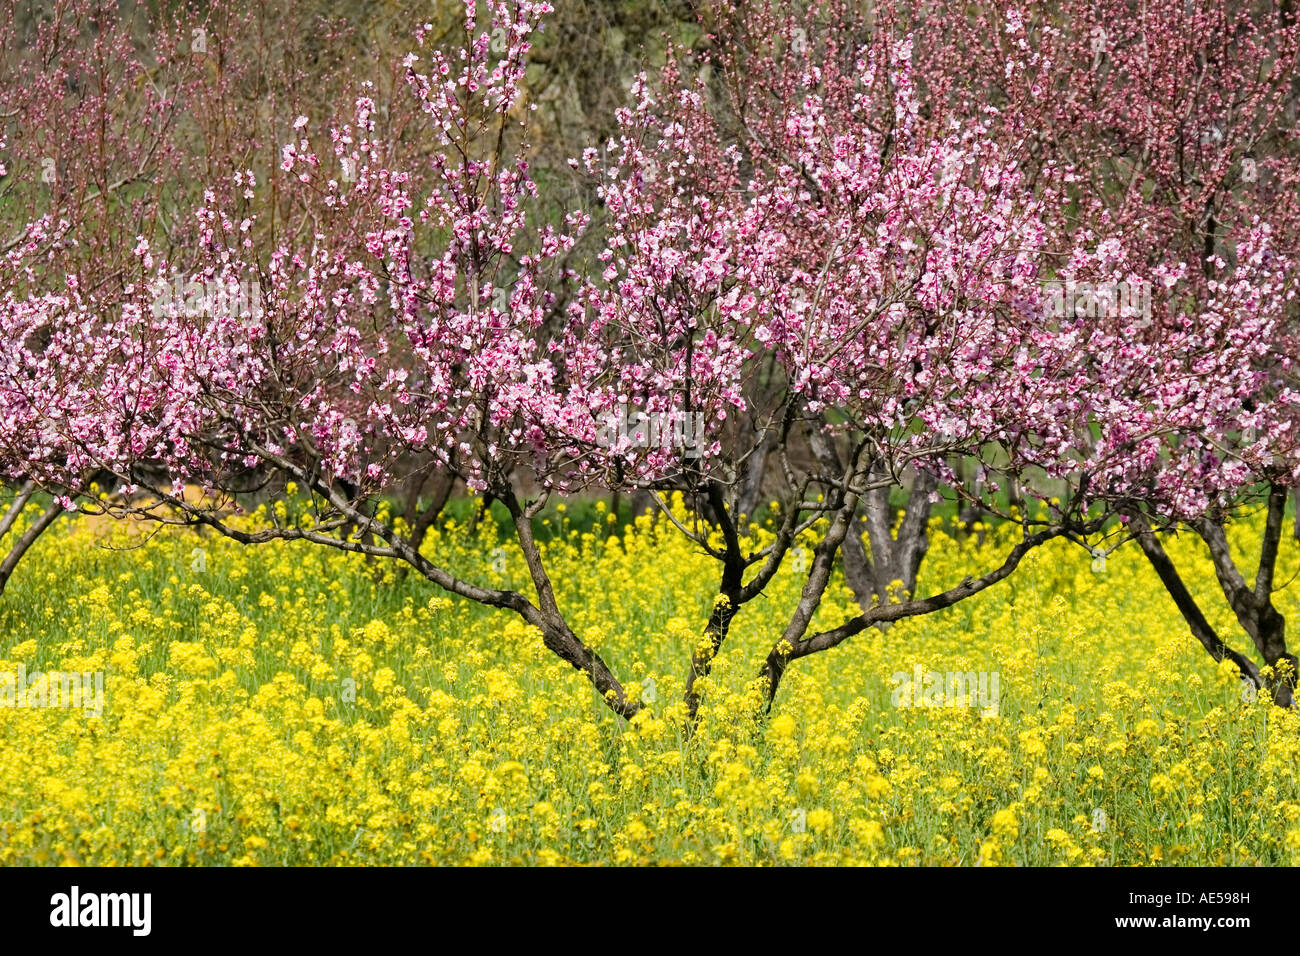 Cherry tree with pink petals blooming in a field of yellow wild mustard in springtime Stock Photo